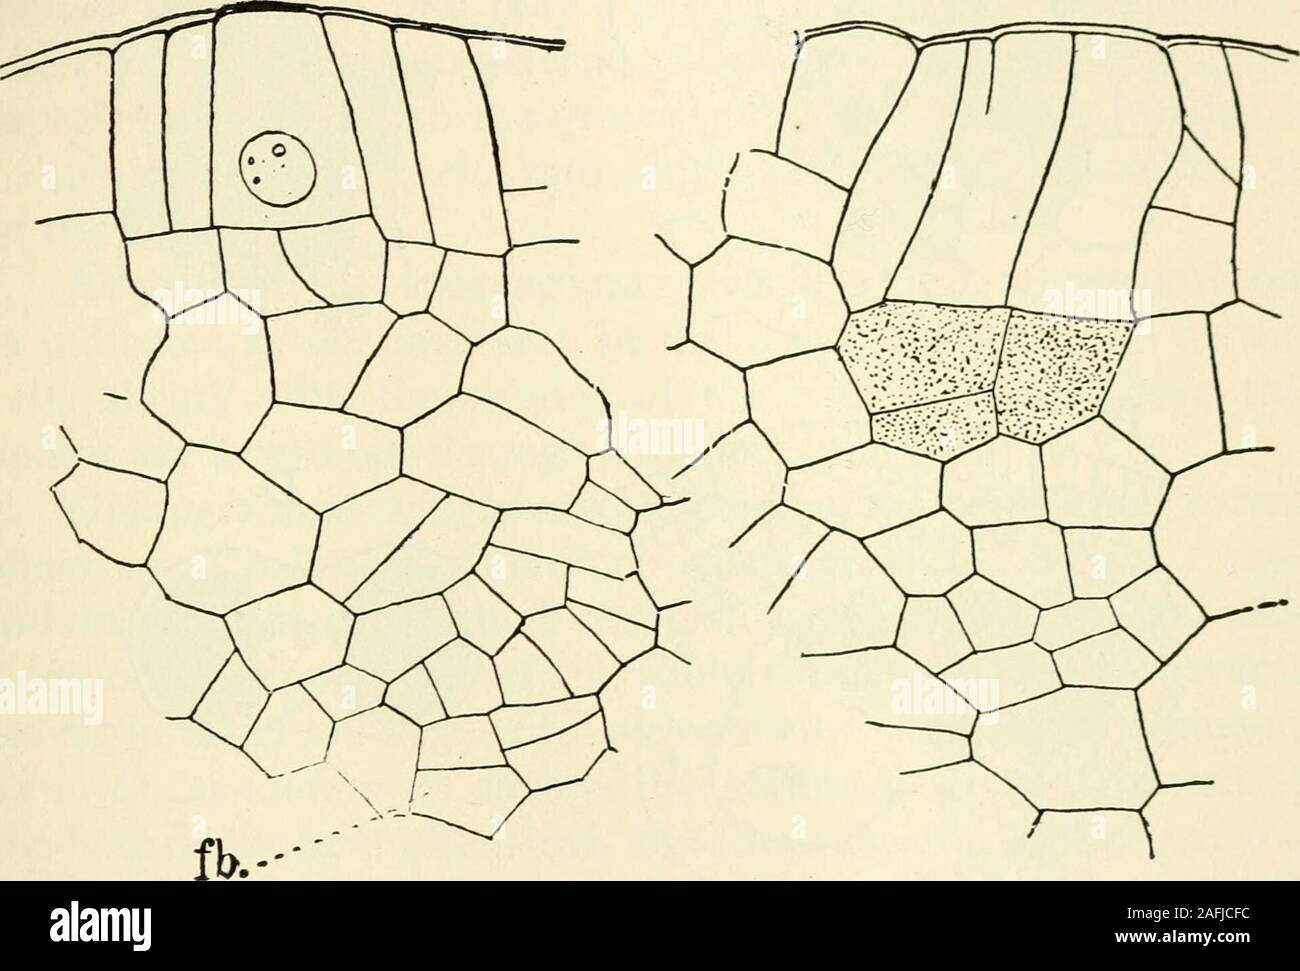 . The structure and development of mosses and ferns (Archegoniatae). VII PTERIDOPHYTA—FILICINE^—OPHIOGLOSSACEJE 255 arate an inner archesporium from the outer cells, destined toform the wall of the sporangium. Between the young spo-rangia the cells form sterile septa. The cell-groups which formarchesporia, and those which develop into sterile septa, aresister-cell groups. All of the sporogenous tissue cannot be traced back to theprimary archesporial cell, as later secondary sporogenous tissuemay be formed by further periclinal divisions in the outer cellsof the sporangium. A transverse section Stock Photo